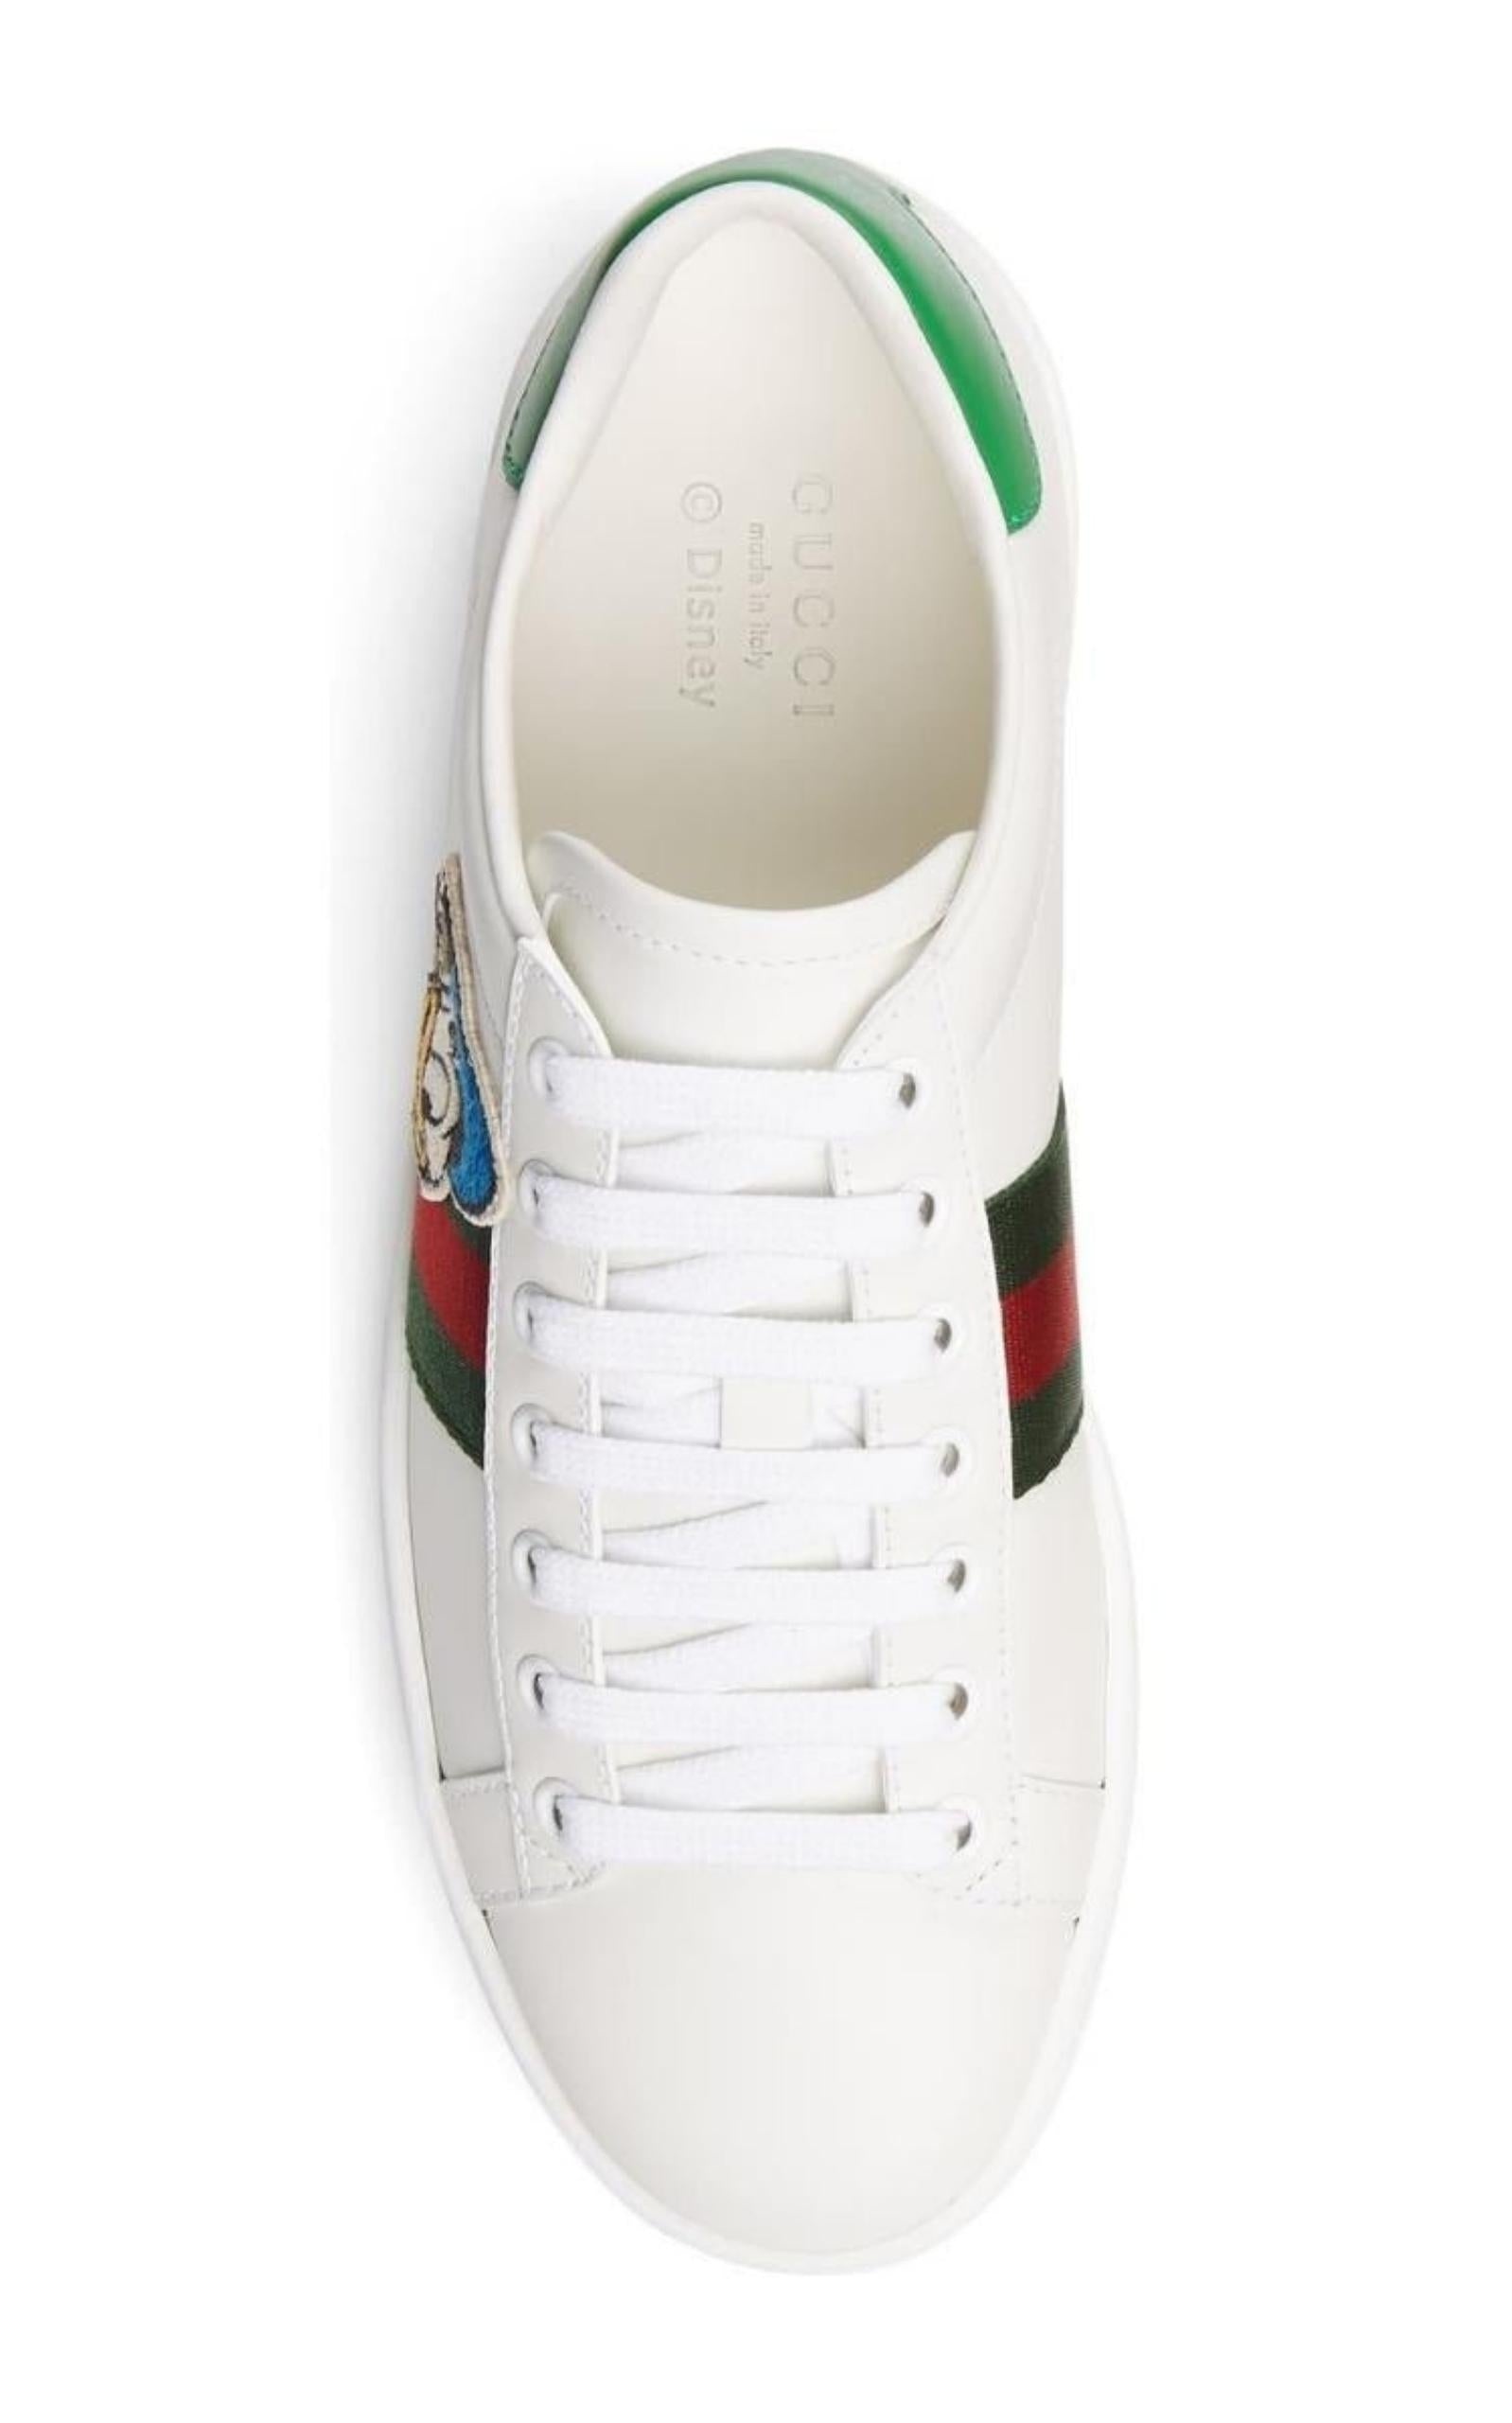 Disney Ace Leather Sneakers - 5